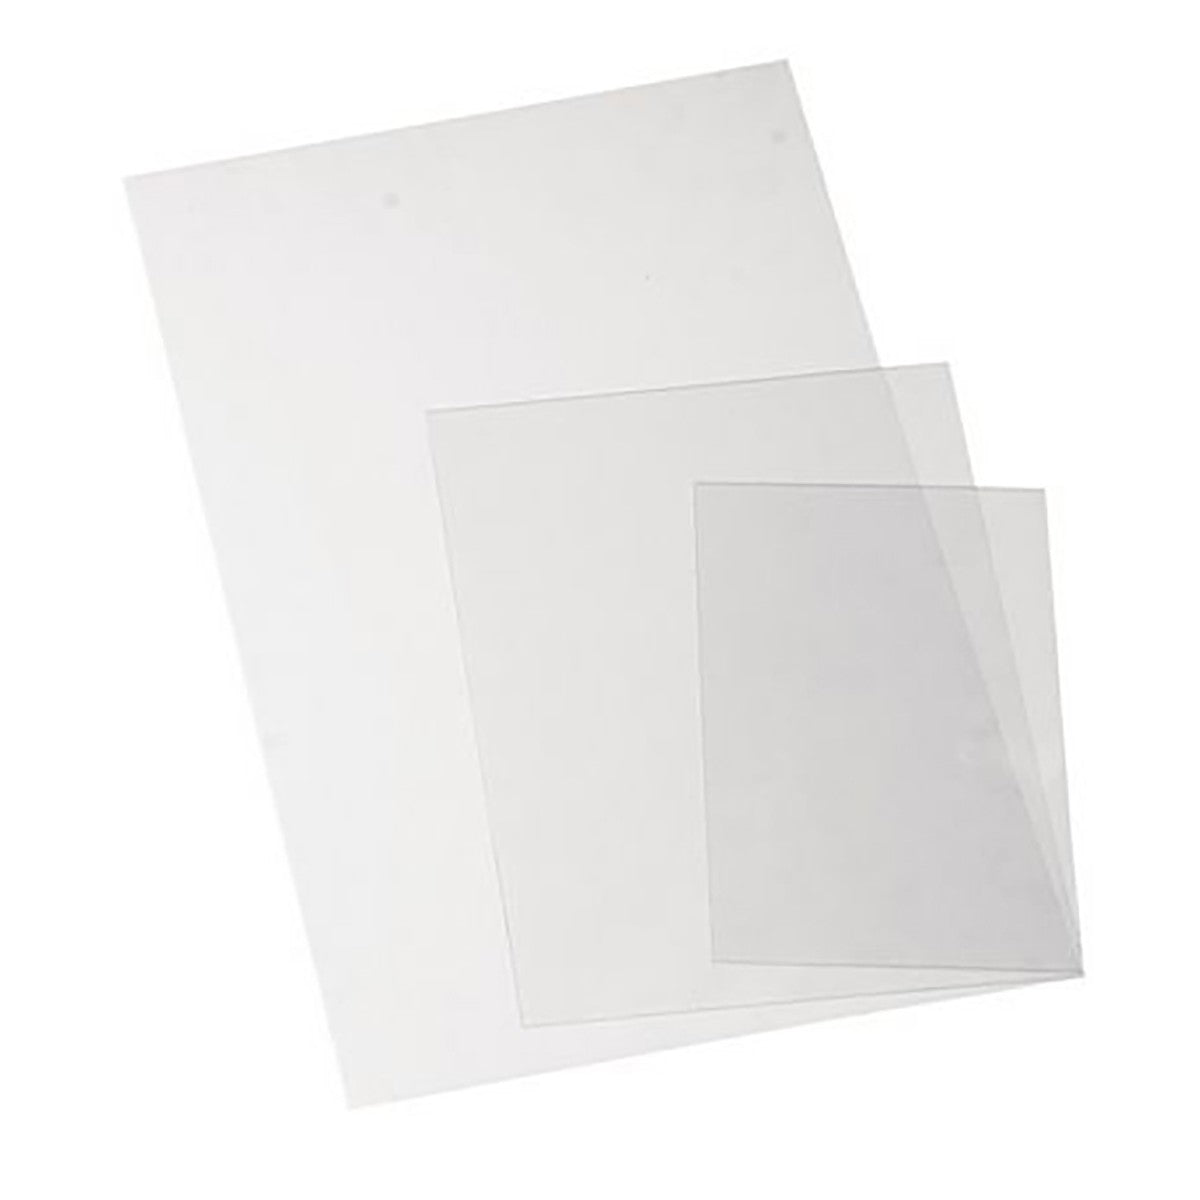 Deluxe Plastic Plates - Melbourne Etching Supplies